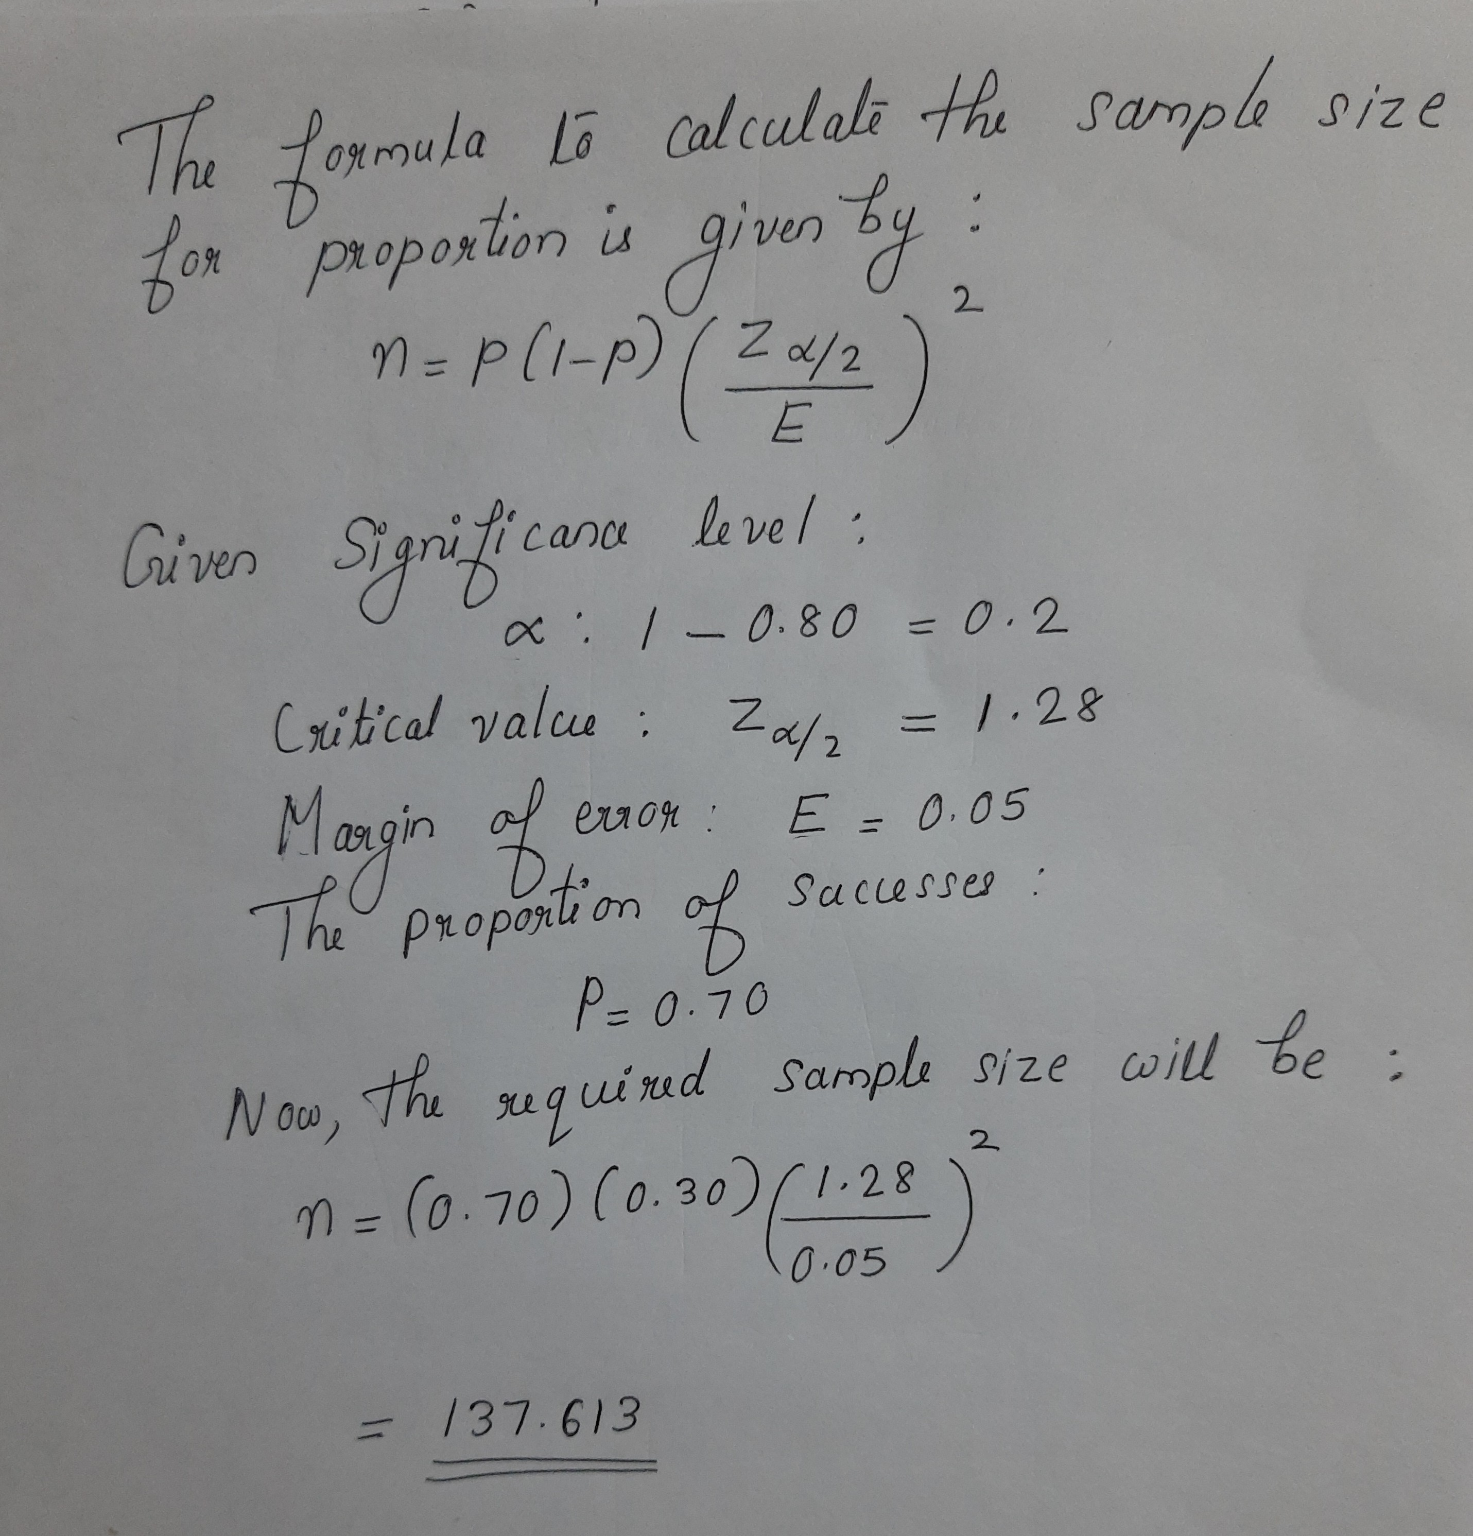 The formula to calculate the sample size fox proportion is given by 2 n = P(1-P) (2 6/2 Given Significance level x: 1-0.80 =0